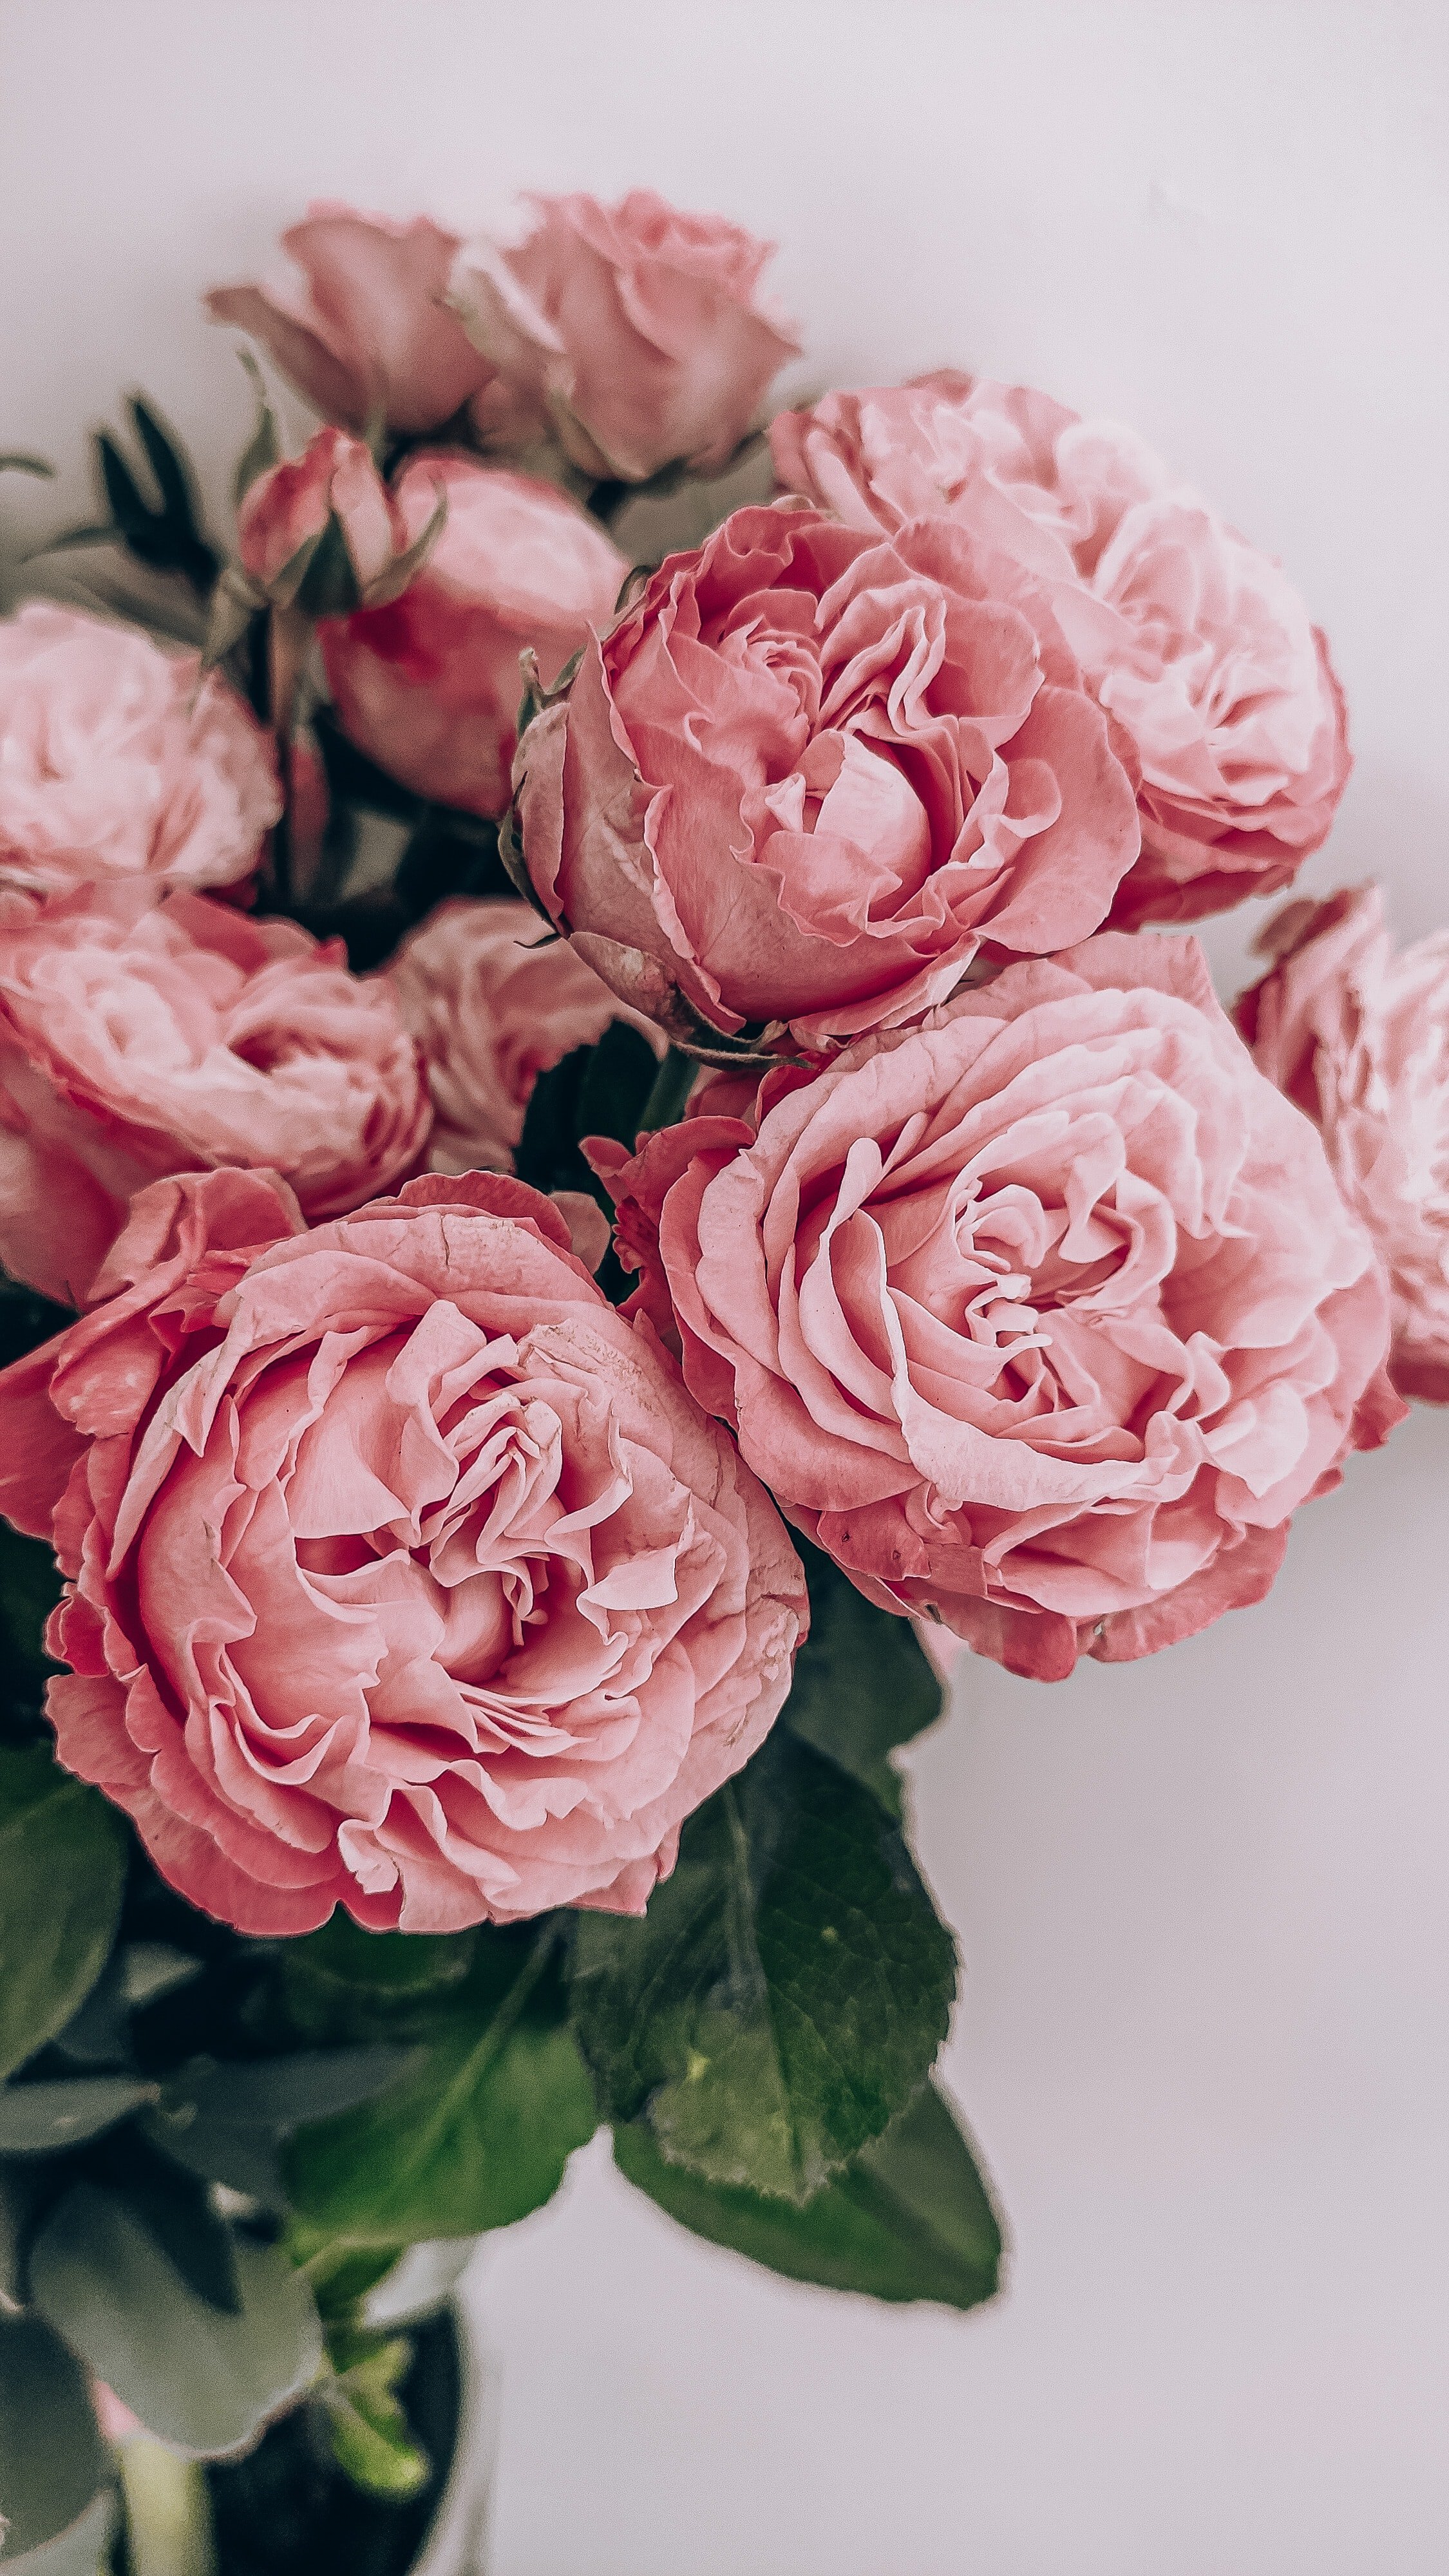 The florist suggested a bouquet of pink roses. | Source: Unsplash